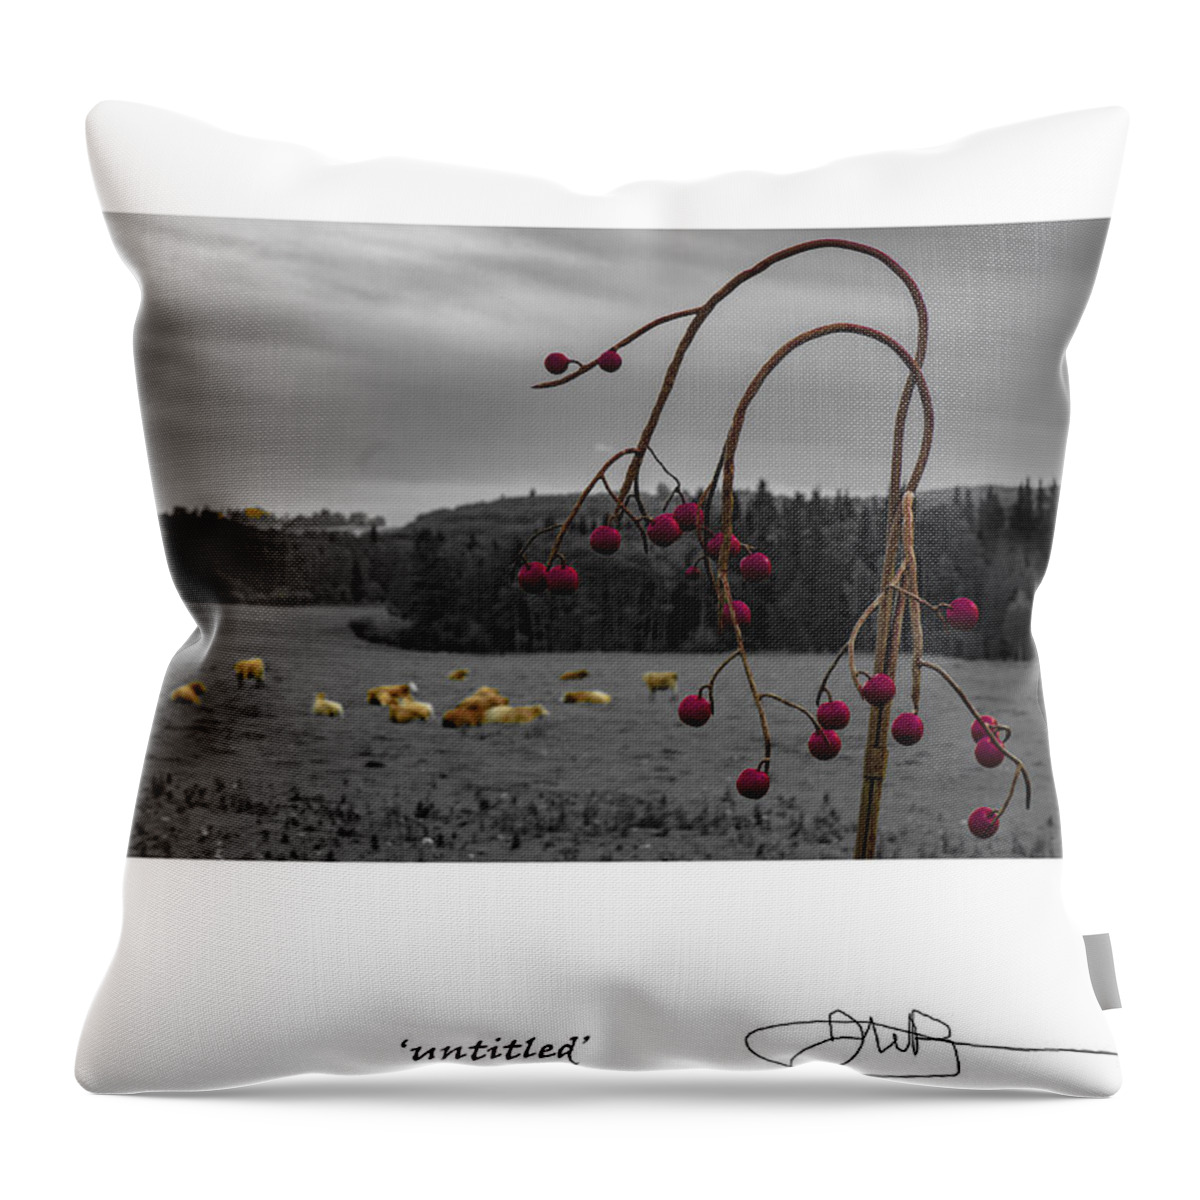 Signed Limited Edition Of 10 Throw Pillow featuring the digital art 25 by Jerald Blackstock